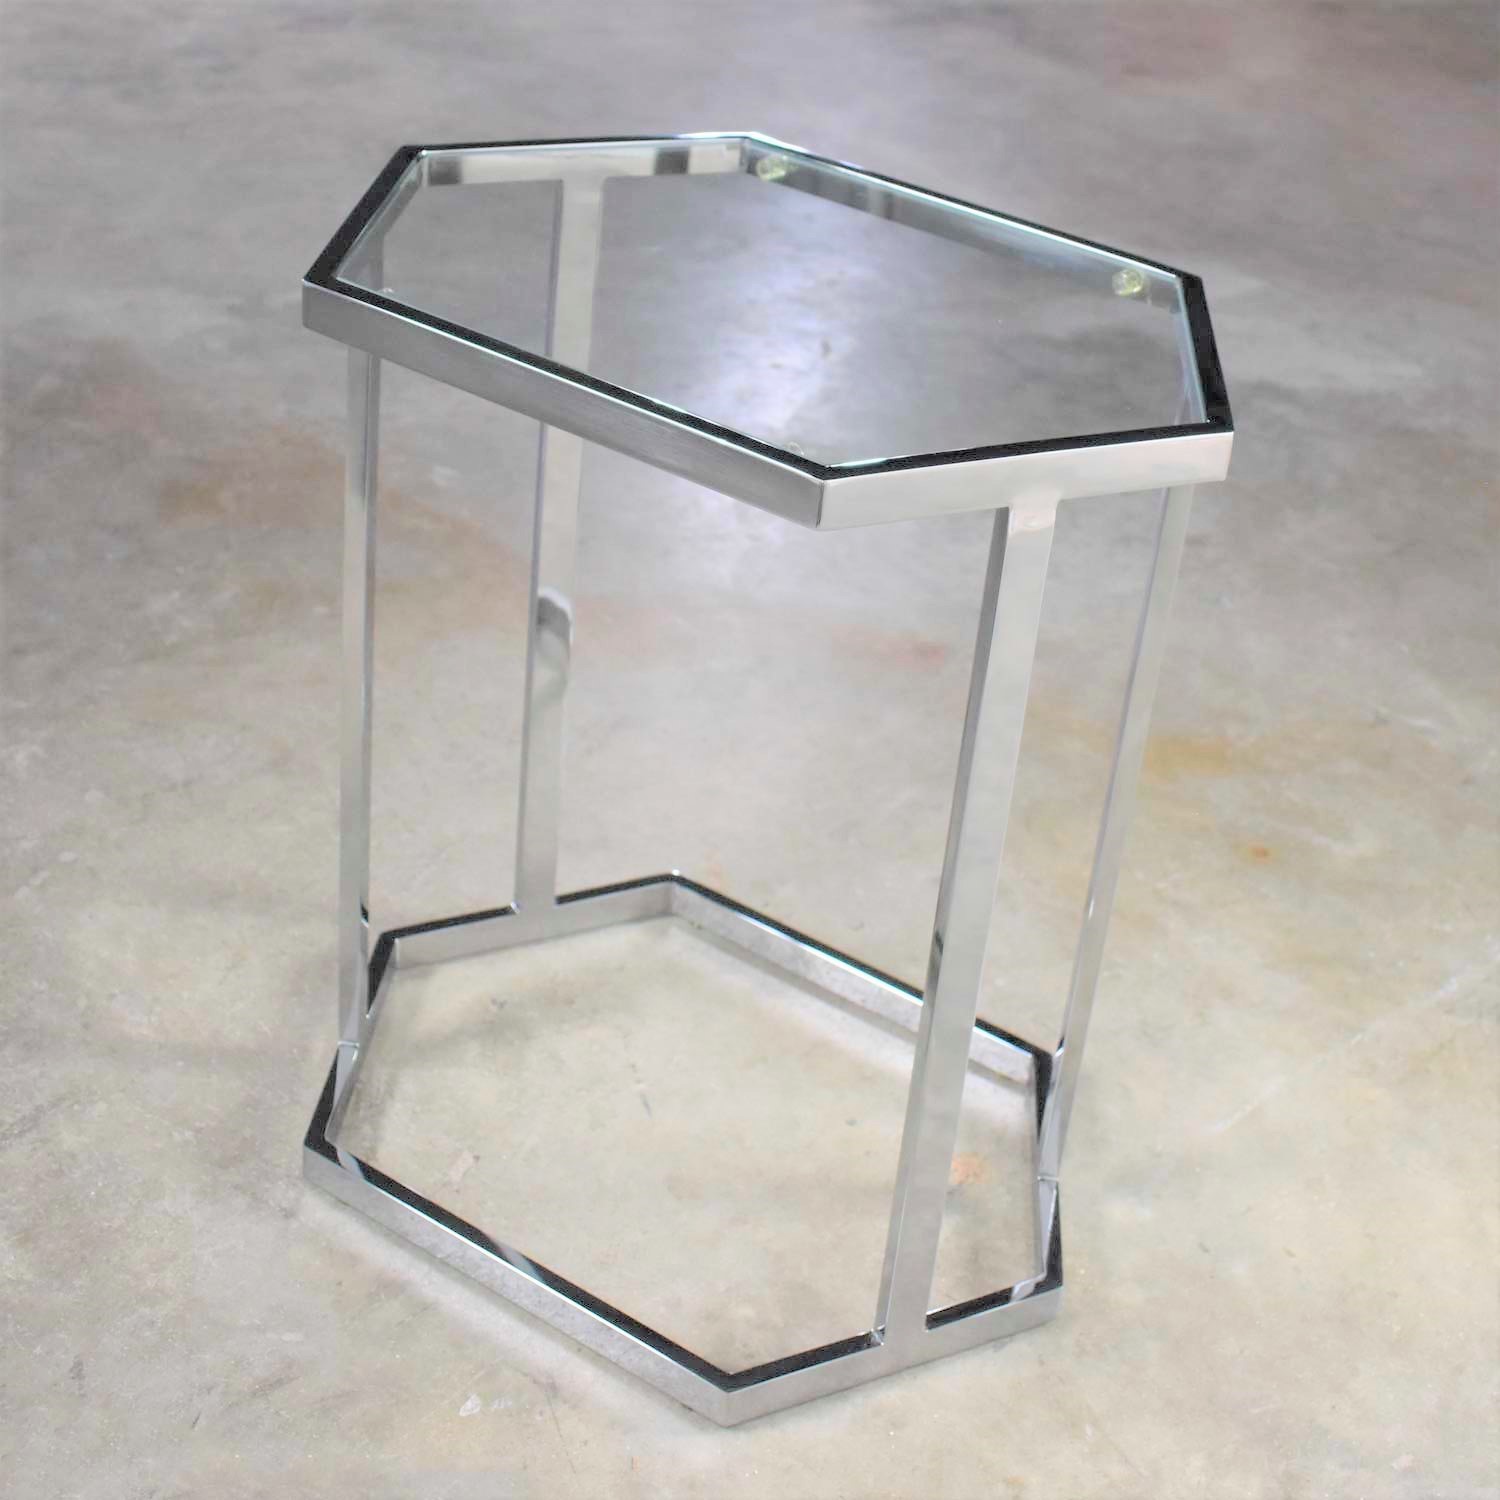 Vintage Modern Chrome and Glass Hexagon Petite Side Table or Occasional Table